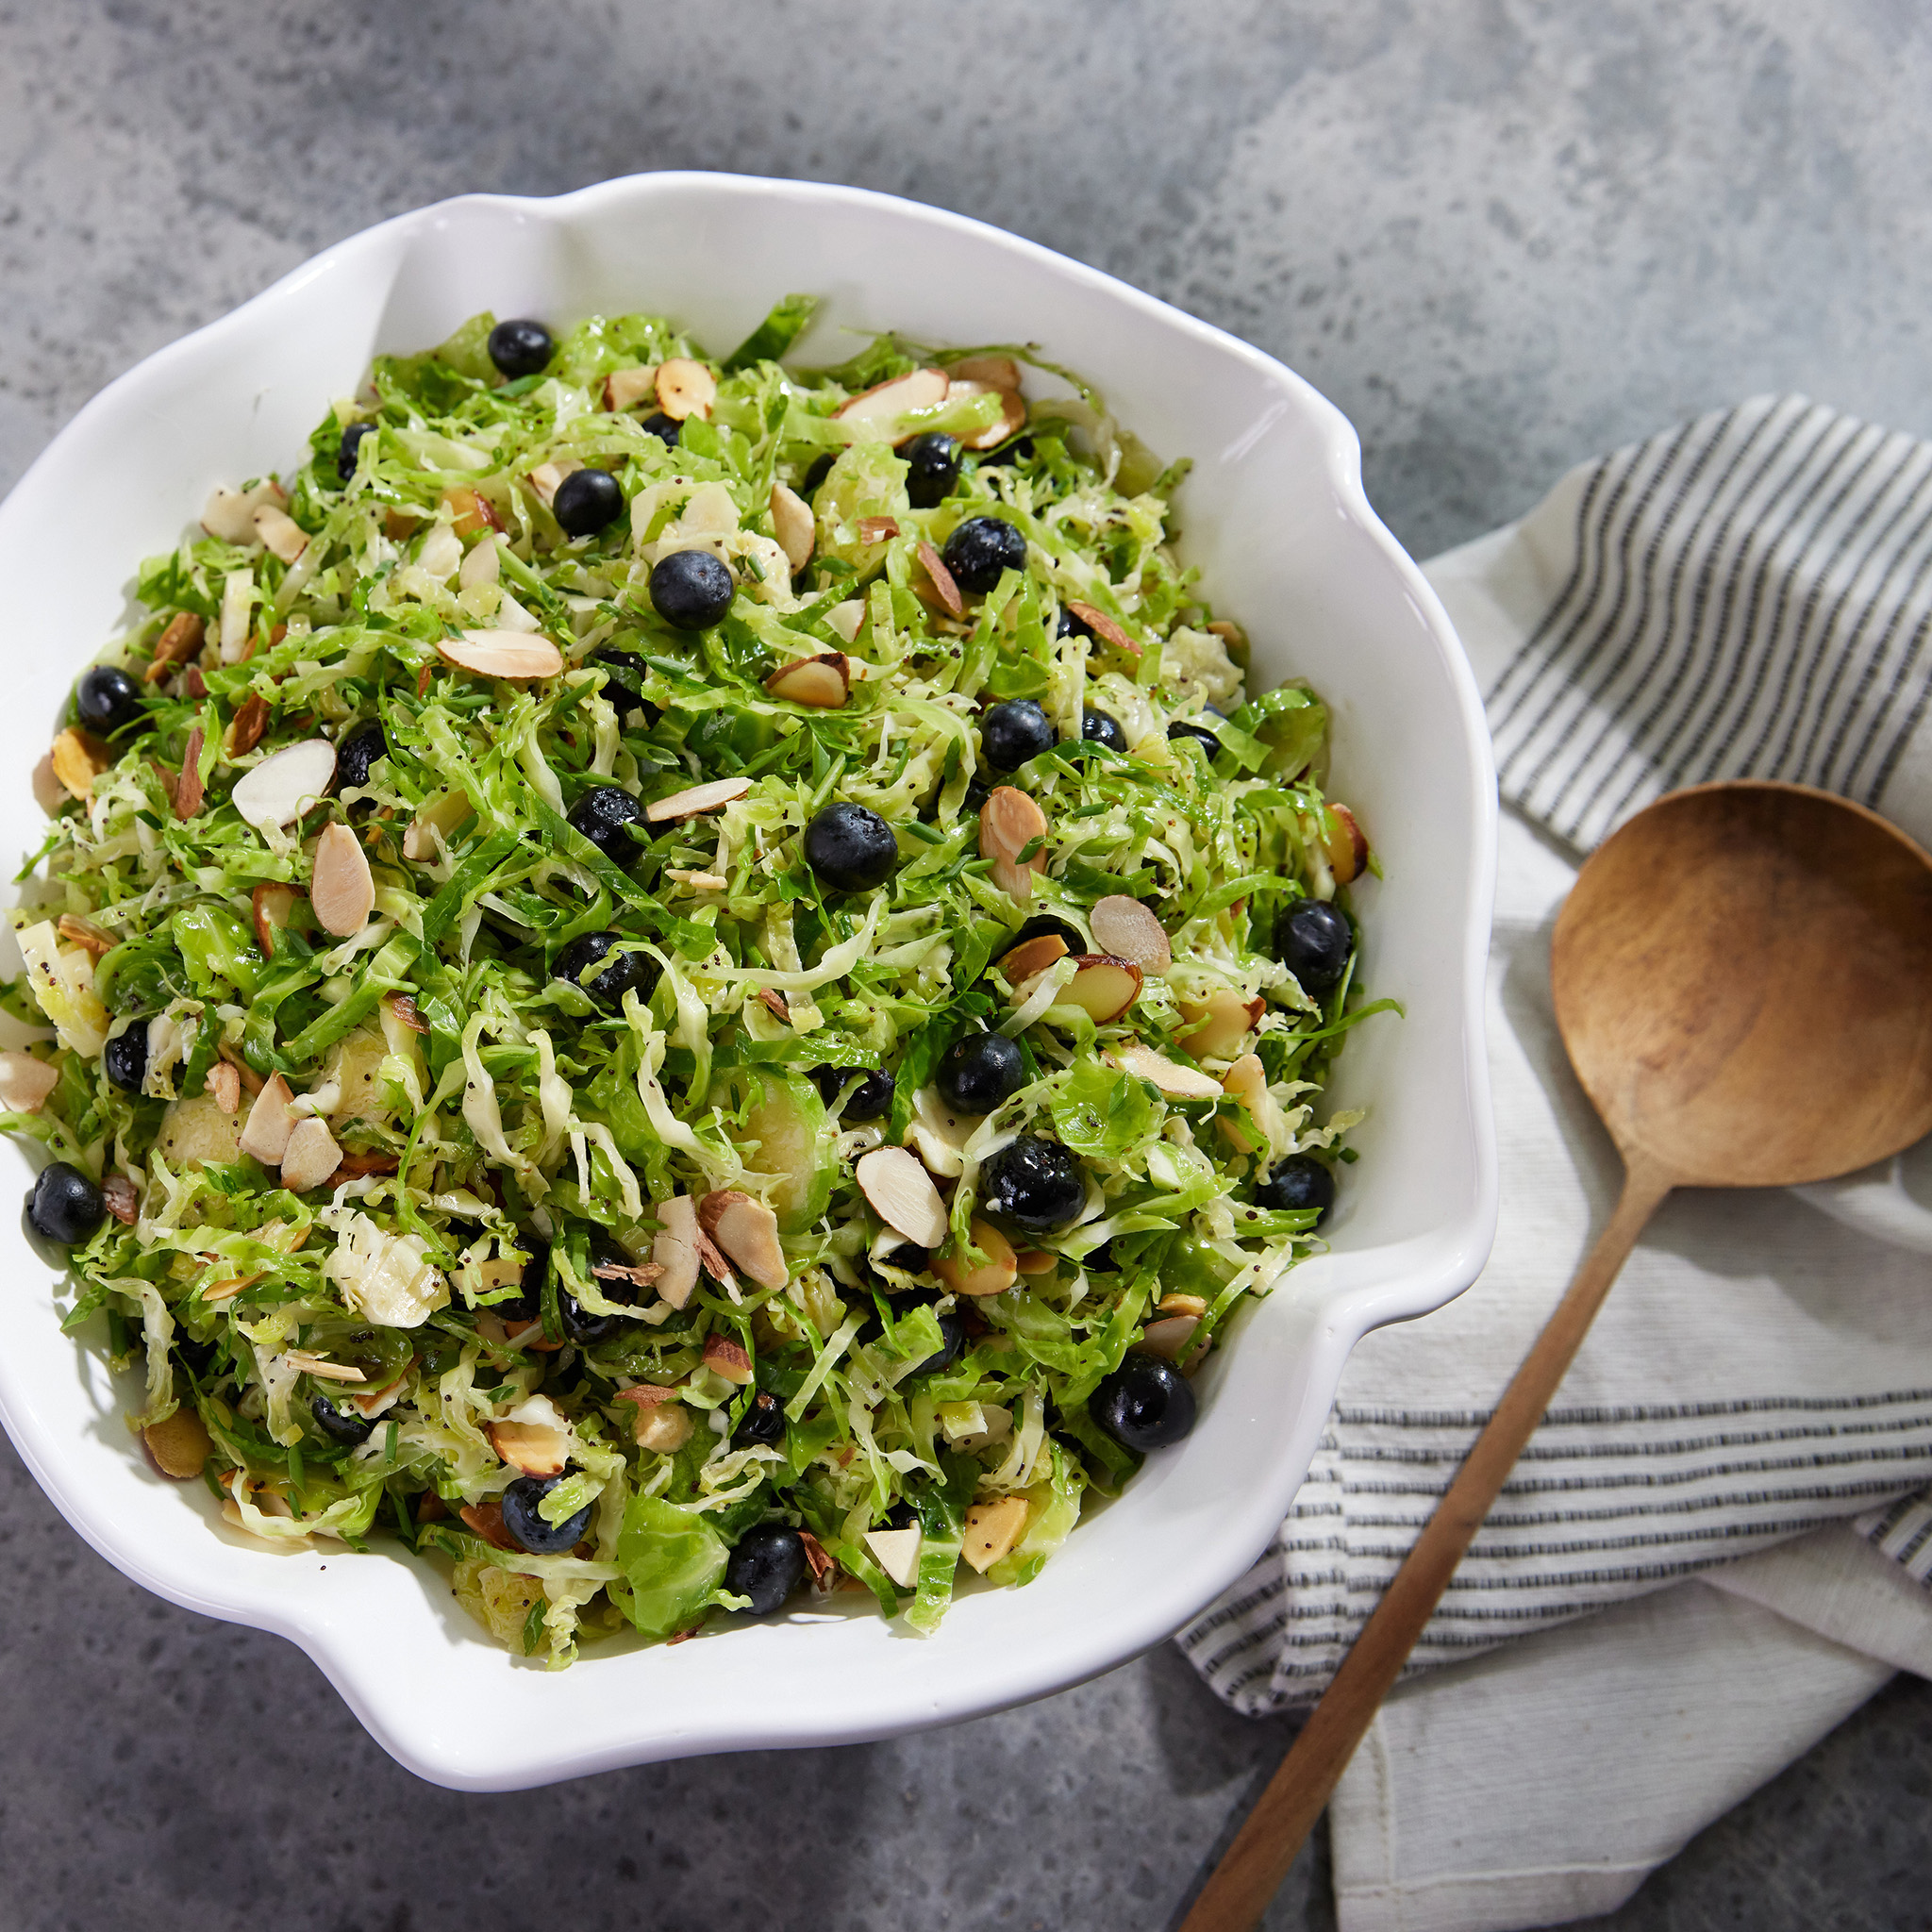 Joanna Gaines's Brussels Sprouts Salad